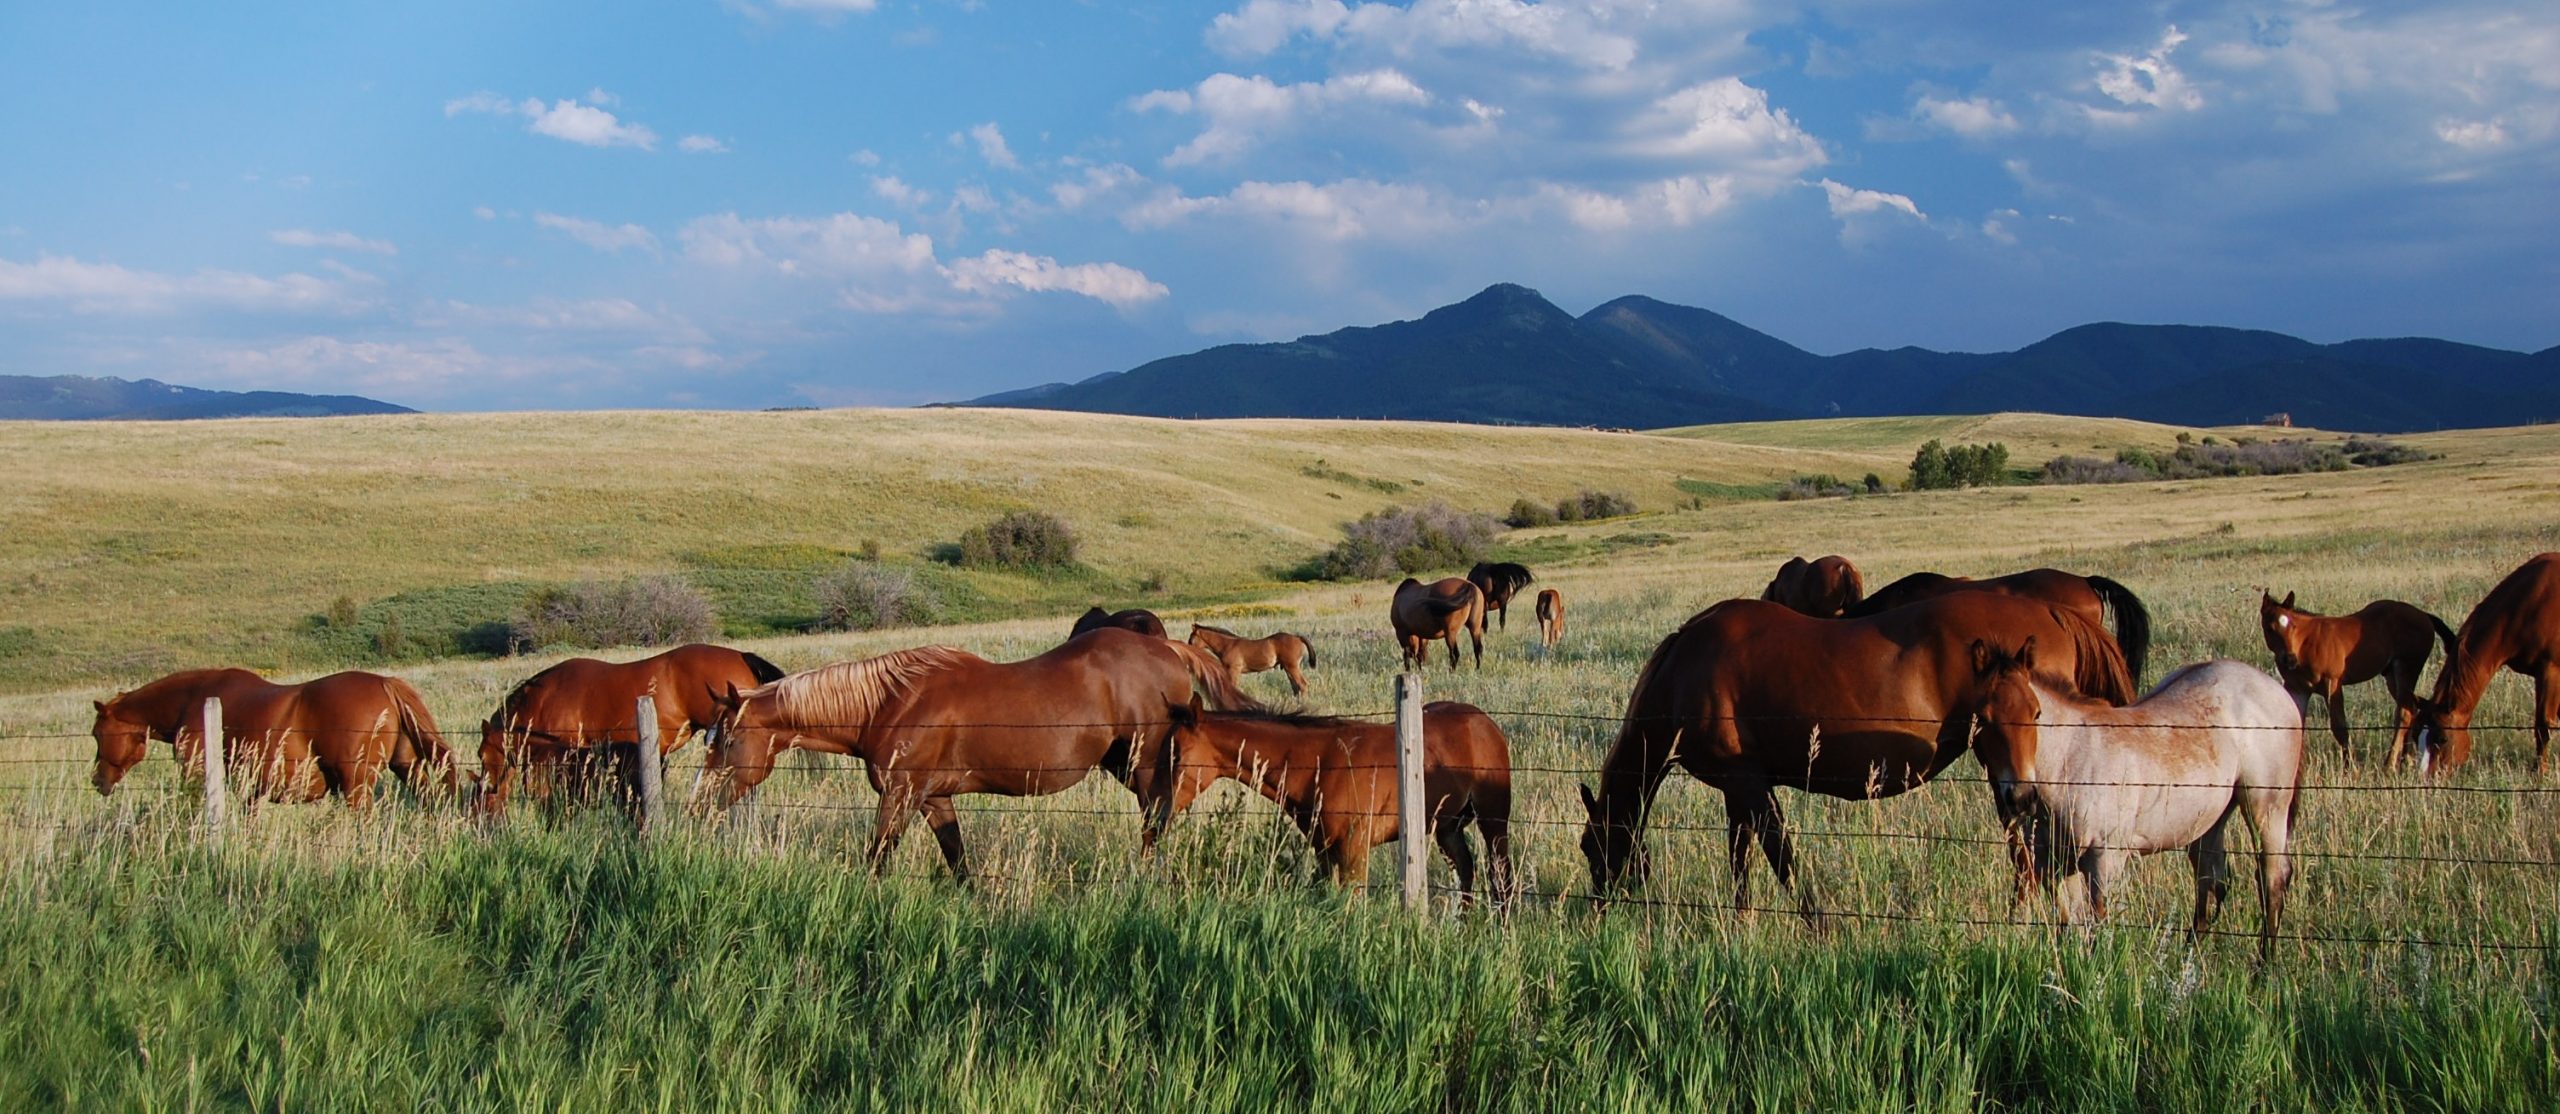 Montana Horse Property Listings $100,000 To $200,000